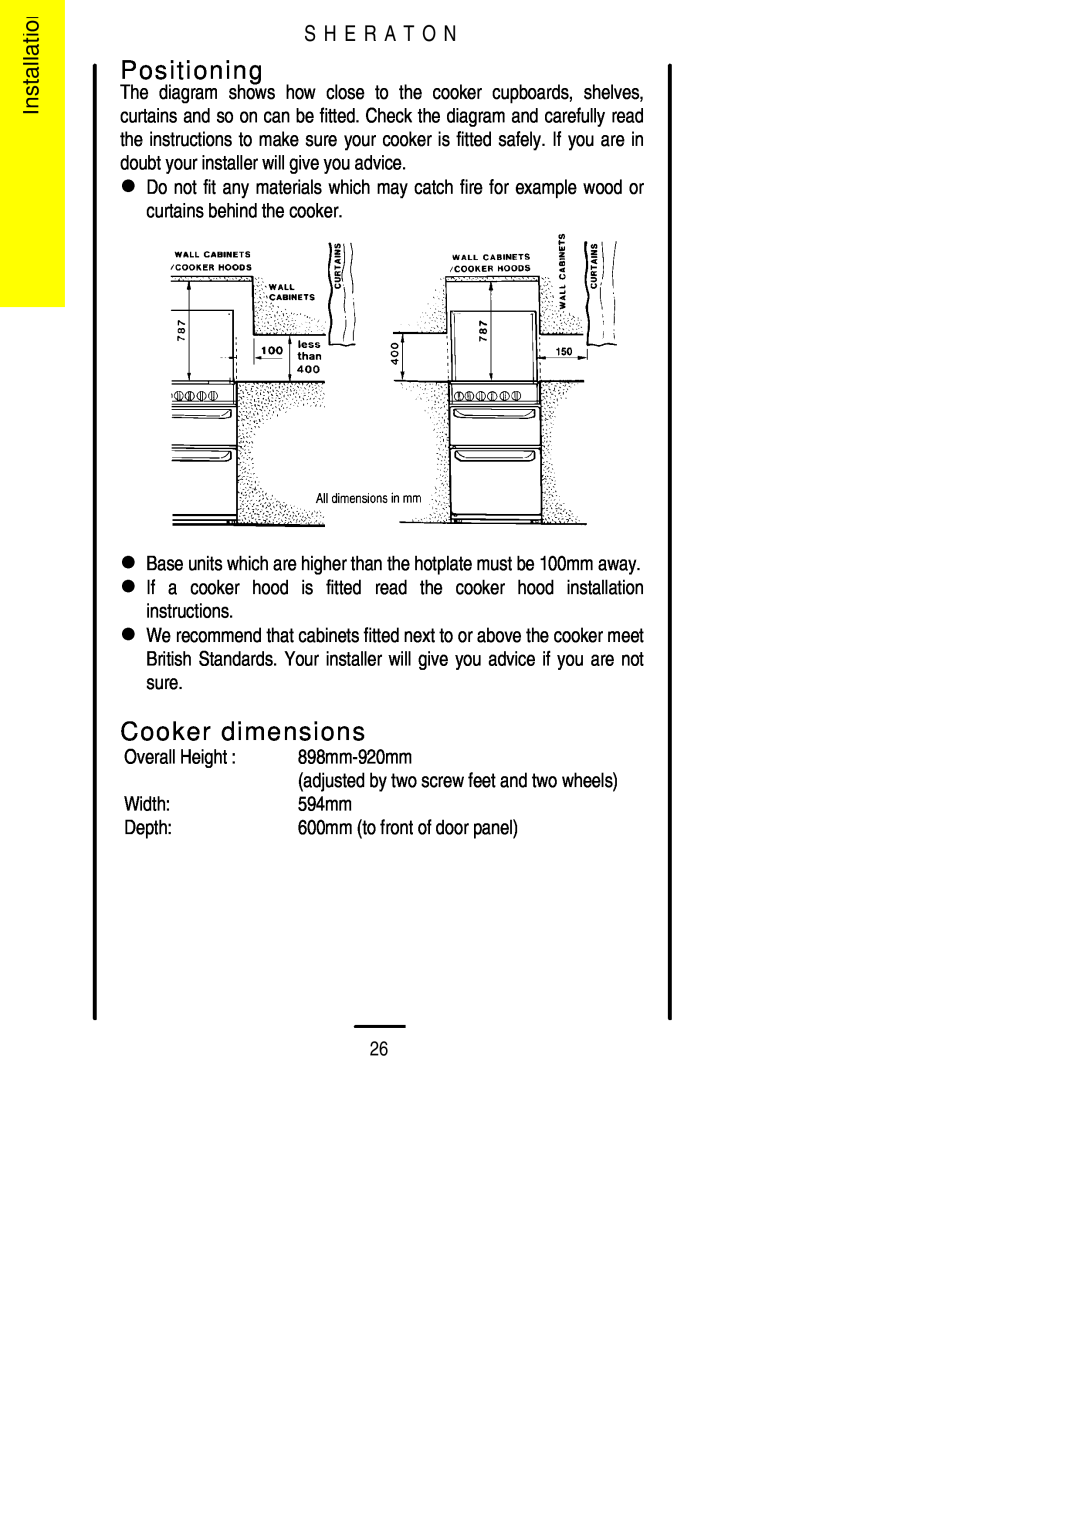 Parkinson Cowan U02059 installation instructions Positioning, Cooker dimensions, Installation, S H E R A T O N 